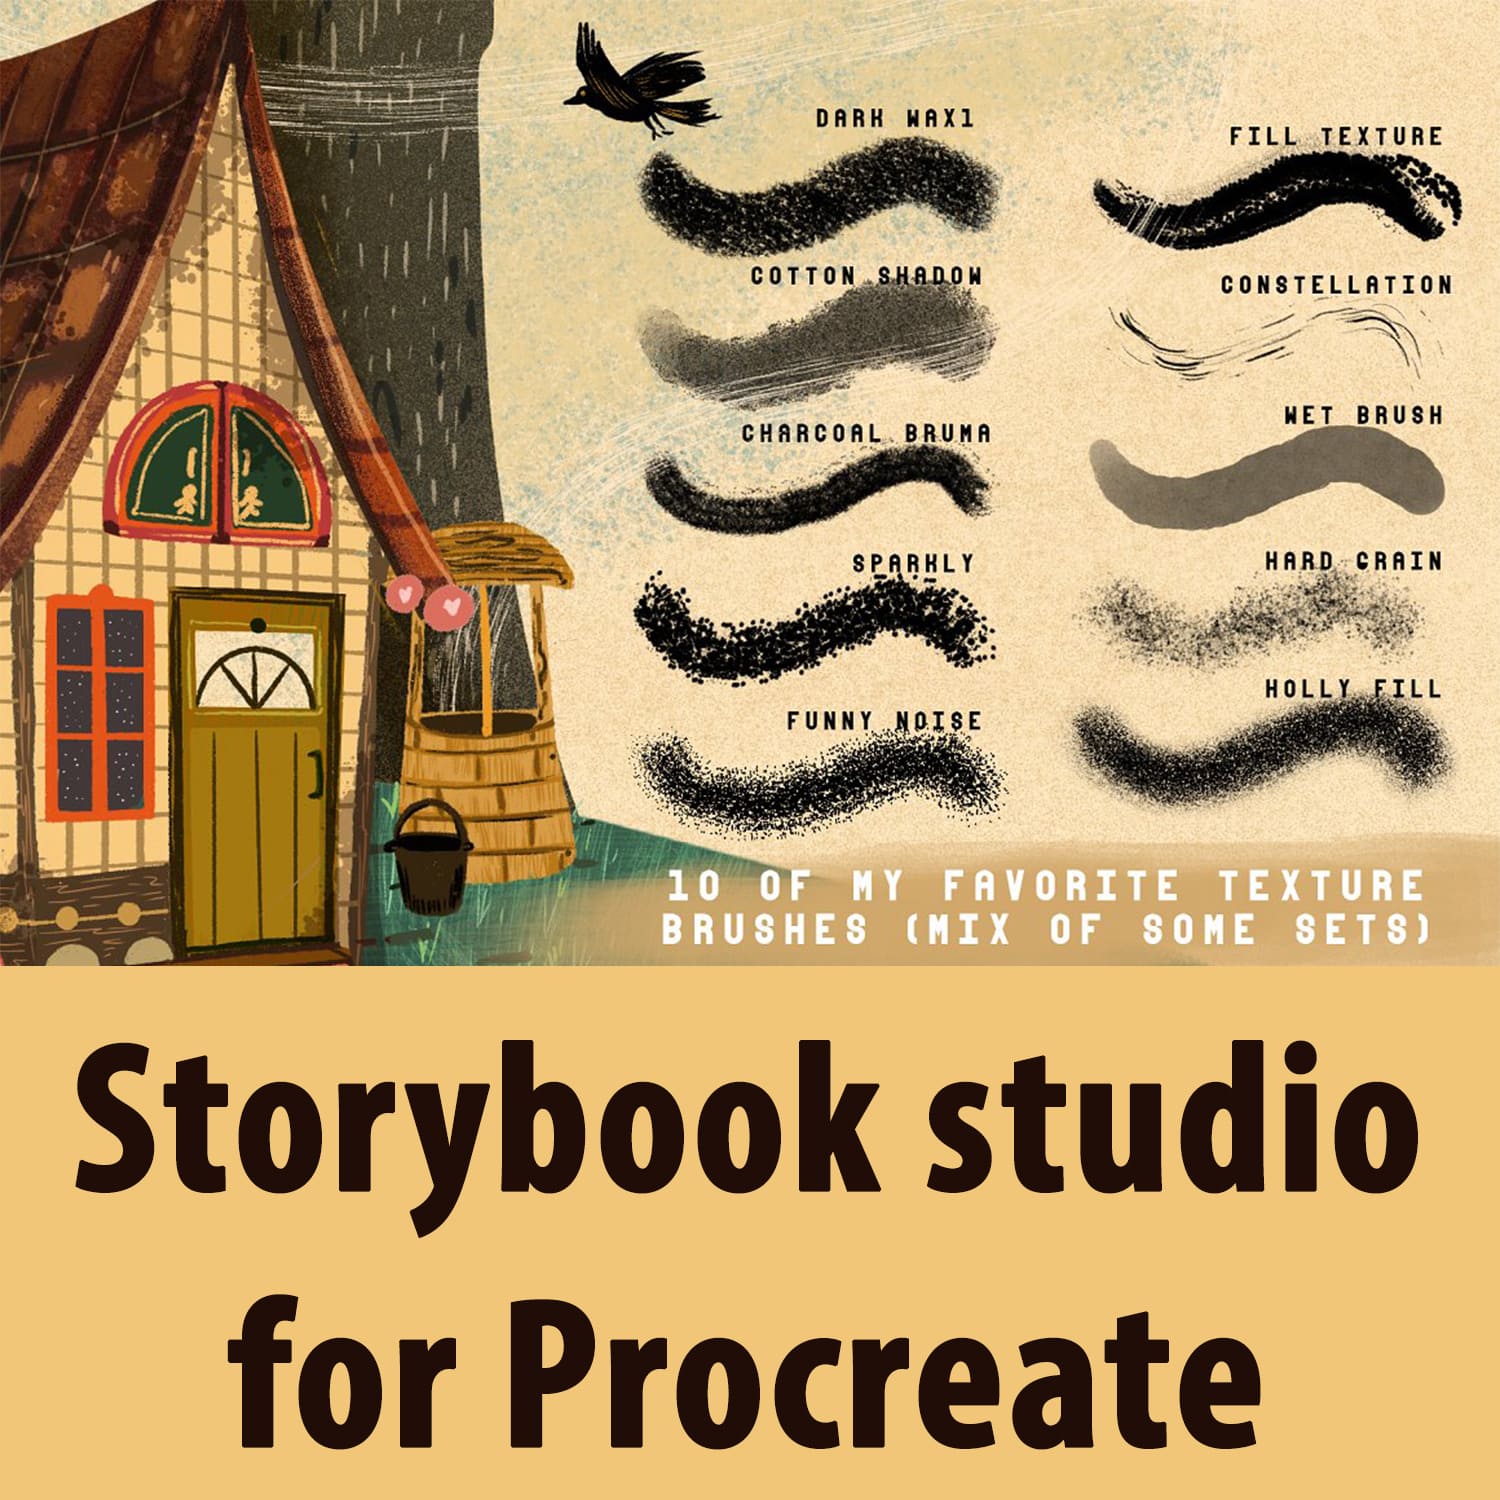 Storybook studio for Procreate main cover.